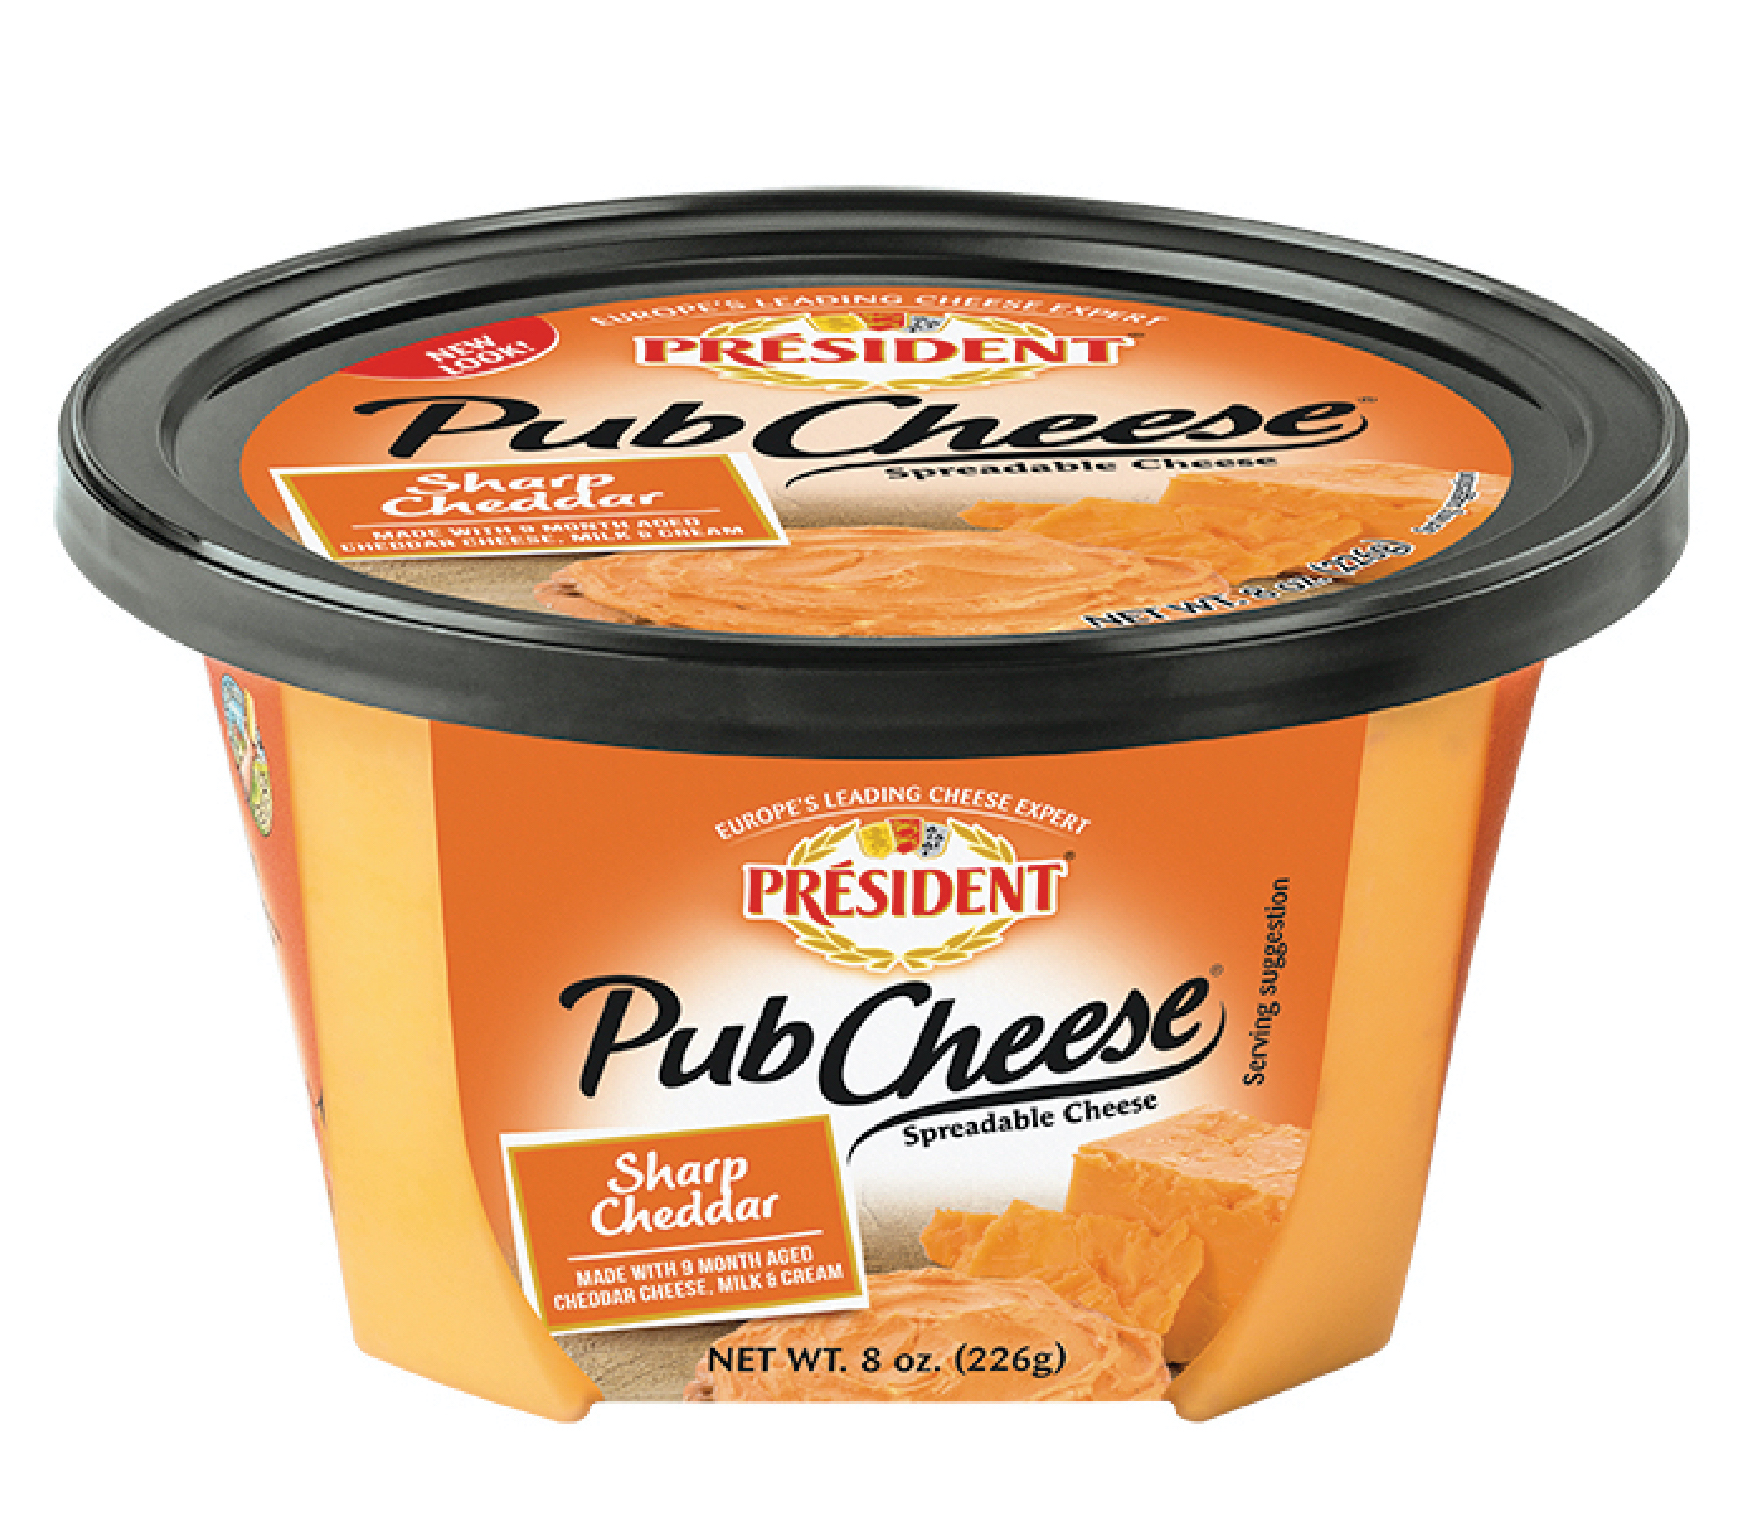 President Pub Cheese Sharp Cheddar Cheese Spread, 8 oz (Refrigerated) - image 1 of 12